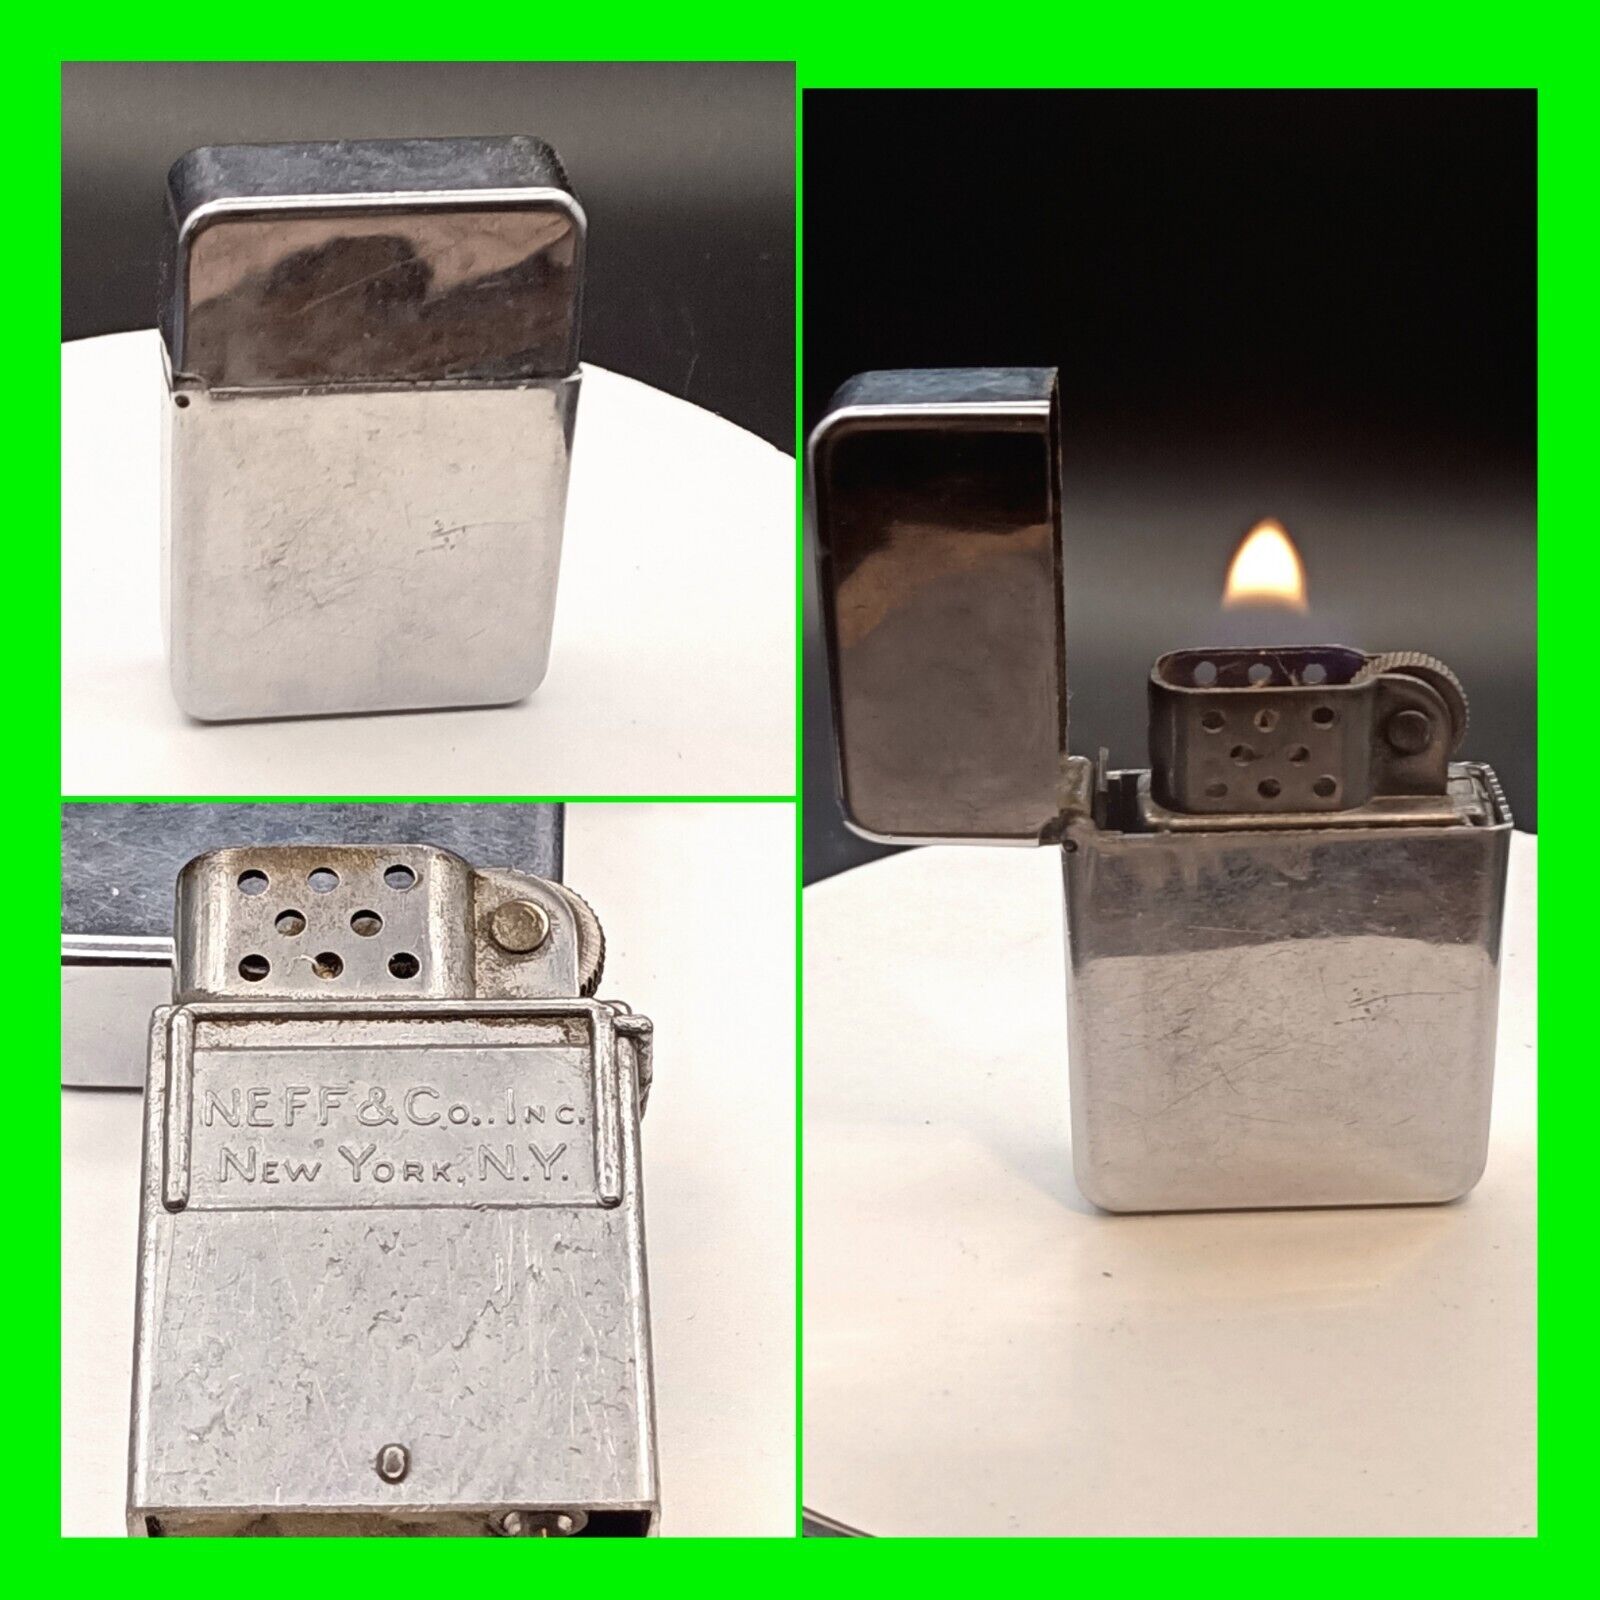 Vintage Uncommon NEFF & Co. Inc New York N.Y. Lighter - Hard To Find - Working 